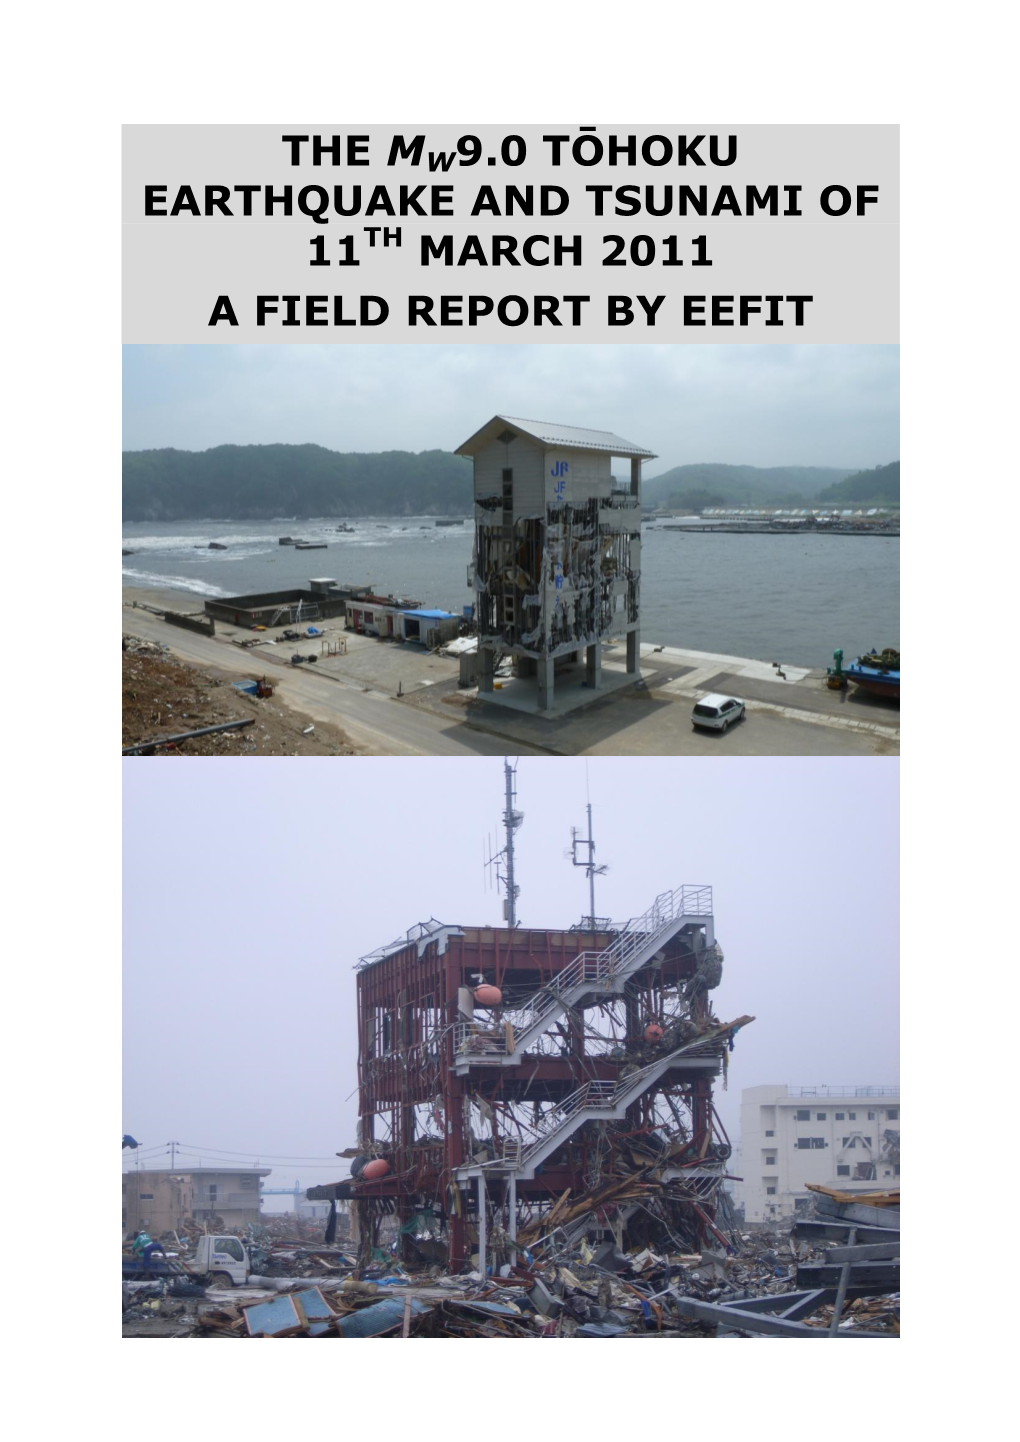 The Mw9.0 Tōhoku Earthquake and Tsunami of 11Th March 2011 a Field Report by Eefit